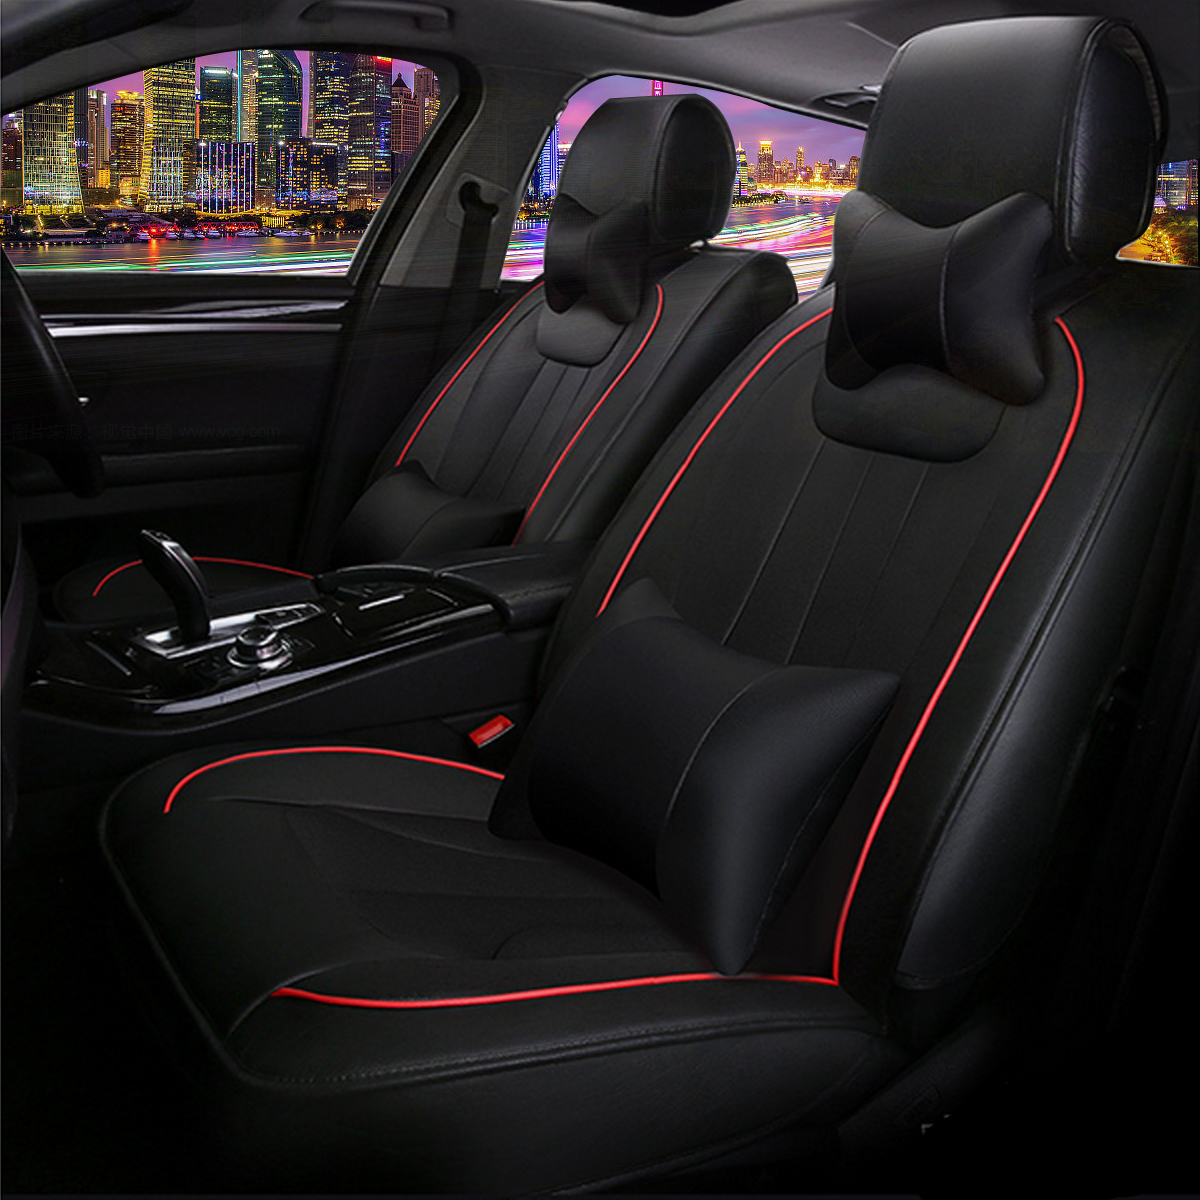 13PCS-PU-Leather-Car-Seat-Cover-Full-Set-Front-Rear-with-Pillow-Waist-Cushion-Universal-for-5-Seats-1327842